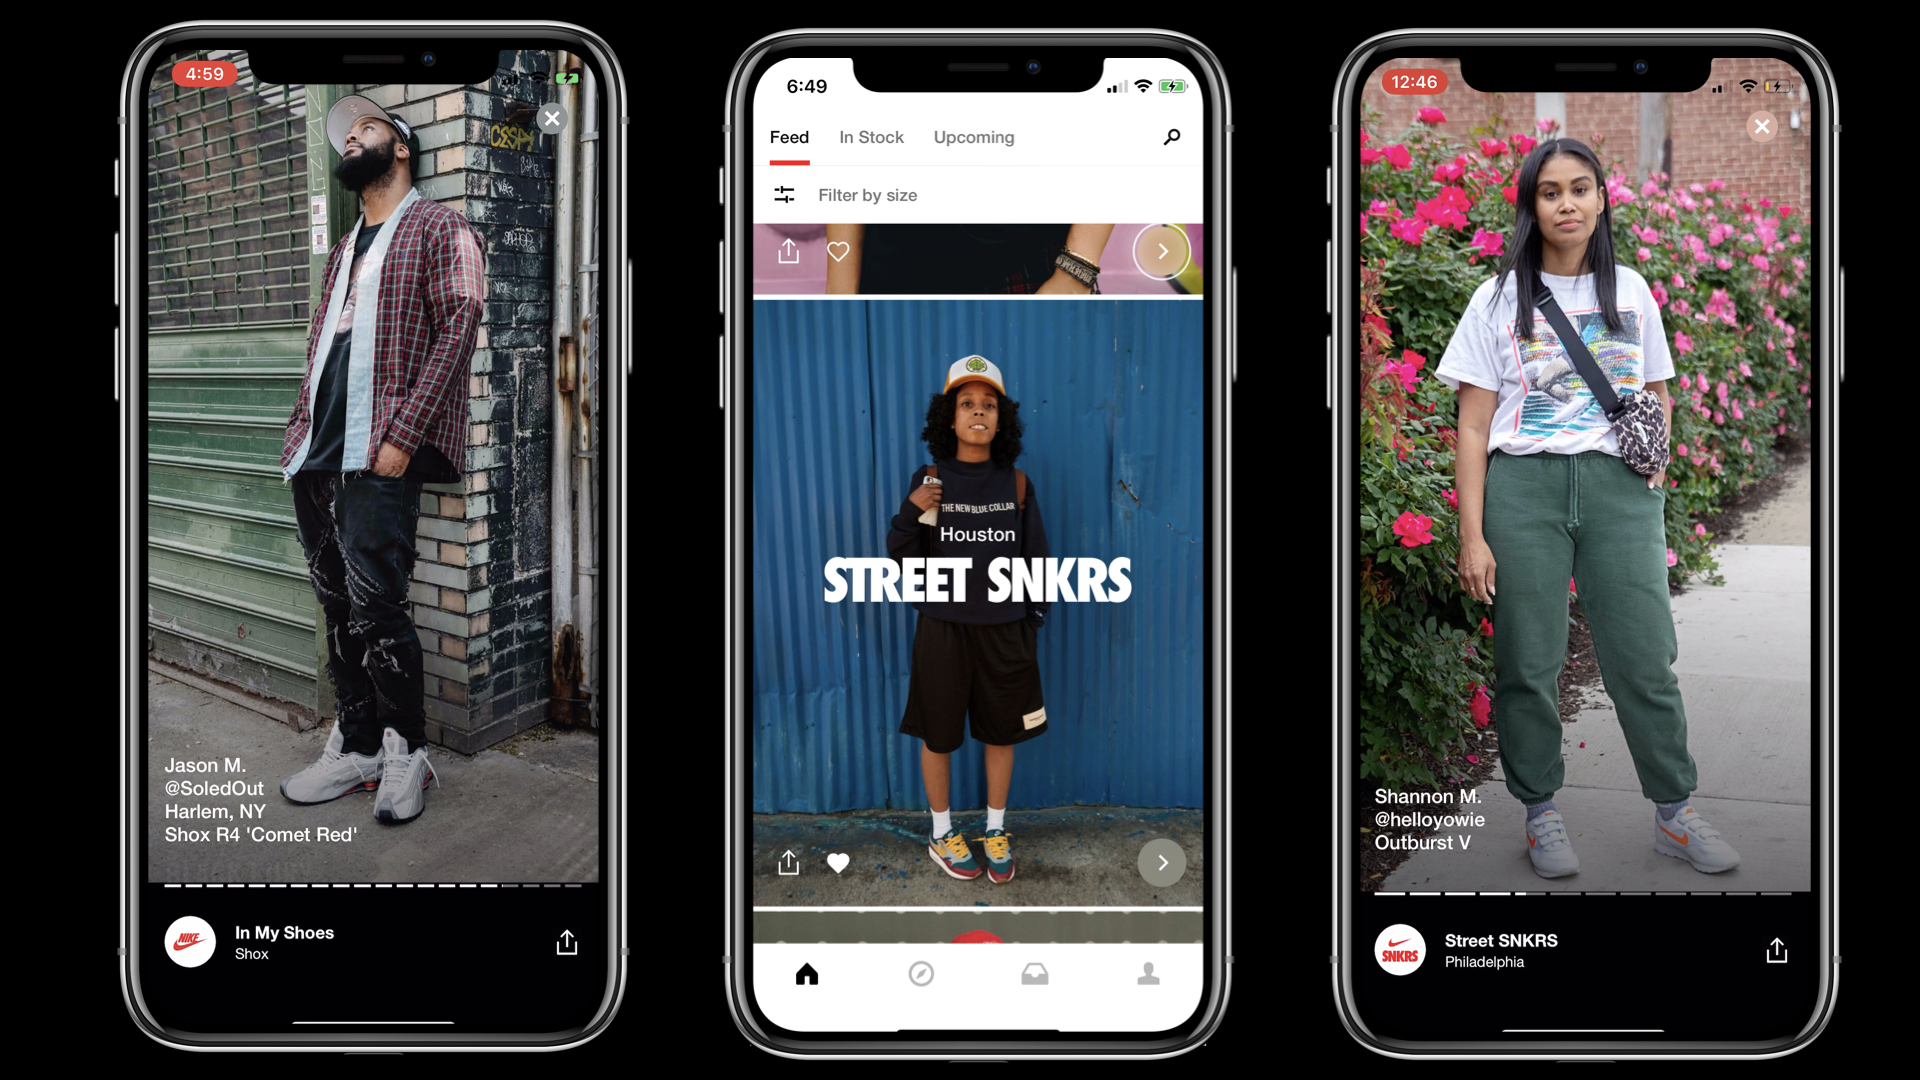 overdrijving De andere dag Blaast op To grow its direct business, Nike is looking to get more out of its app  users - Modern Retail